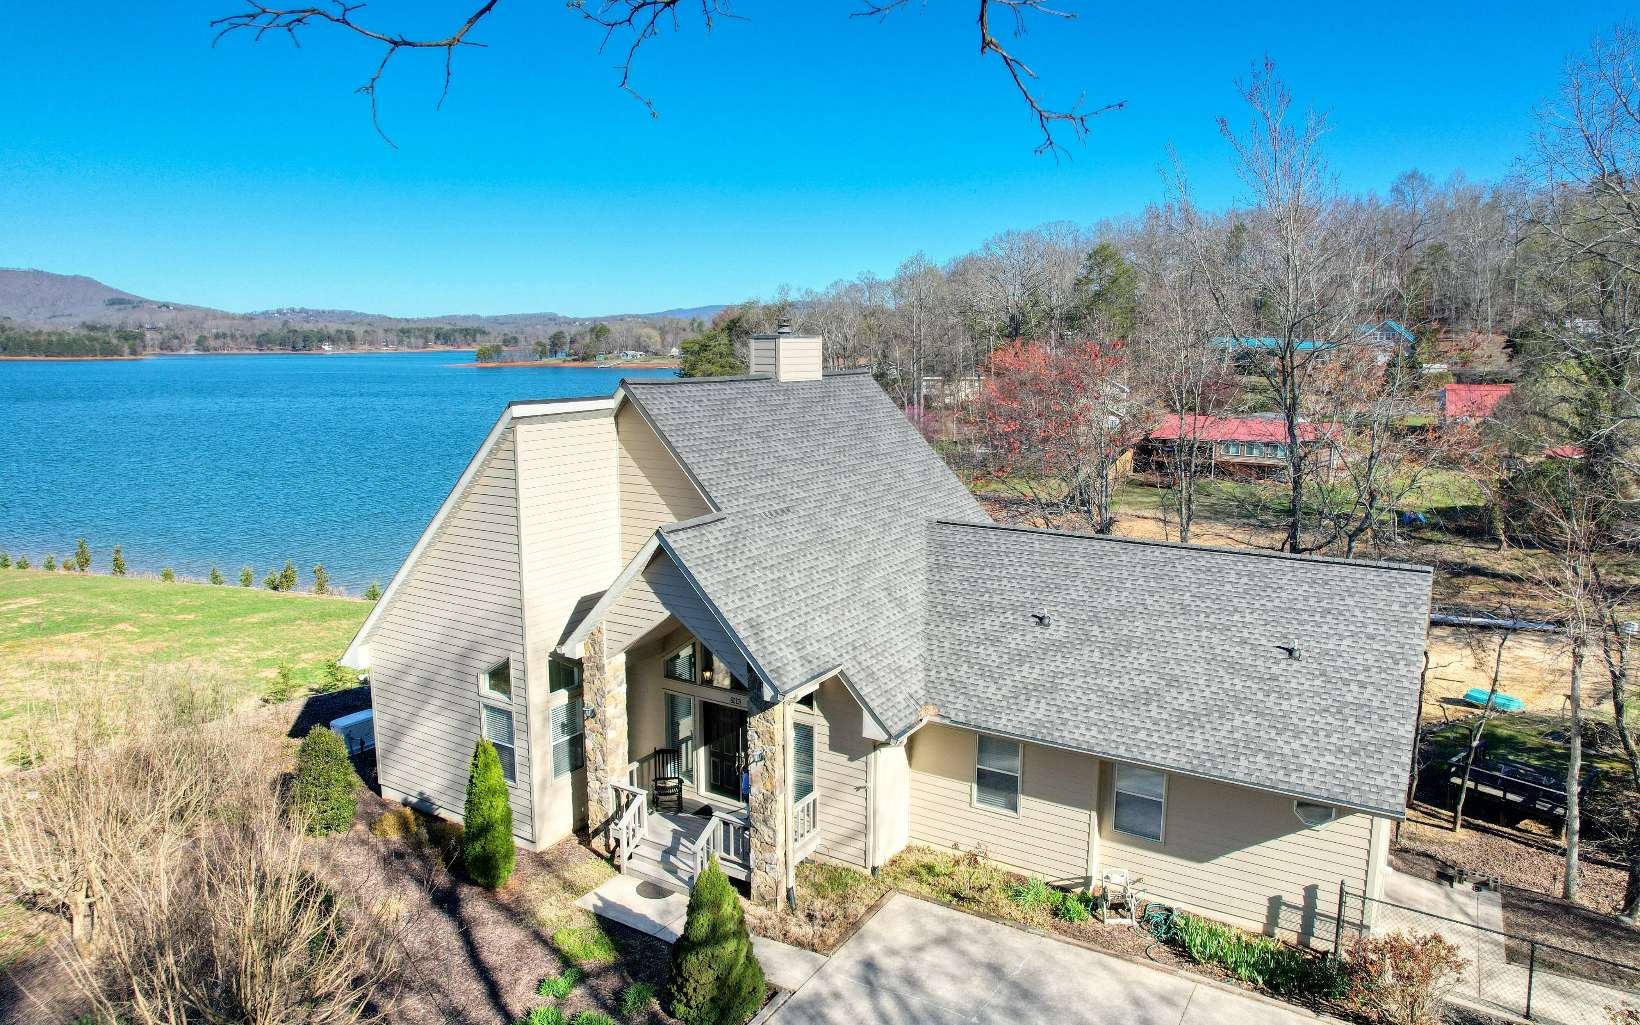 Well Maintained Custom Built Lake Front Furnished Home Located in Hiawassee at Chatuge Shores. Offers Year Round Lake and Mountain Views, Permitted Dock in Place, Large Circular Concrete Driveway with Additional Parking Areas, HOME GENERATOR. Oversized Two Car Garage, Covered Screened Porch, Open Decks. Interior offers an Open Floor Plan, High Ceilings and a Chalet Style Design to Look Out to the Lake, Hardwood Floors, Granite Kitchen Countertops, All Appliances, Walk-In Pantry, Full Laundry Room, Open Floor Plan, Fireplace, Large Master Bedroom with Double Sinks, Jetted Tub and Separate Shower in the Master Bathroom, Walk-In Closets. Basement Has Two Bedrooms, Full Bath, Large Sitting Area, and Large 19x14 Storage Room. THIS IS MOVE-IN READY.